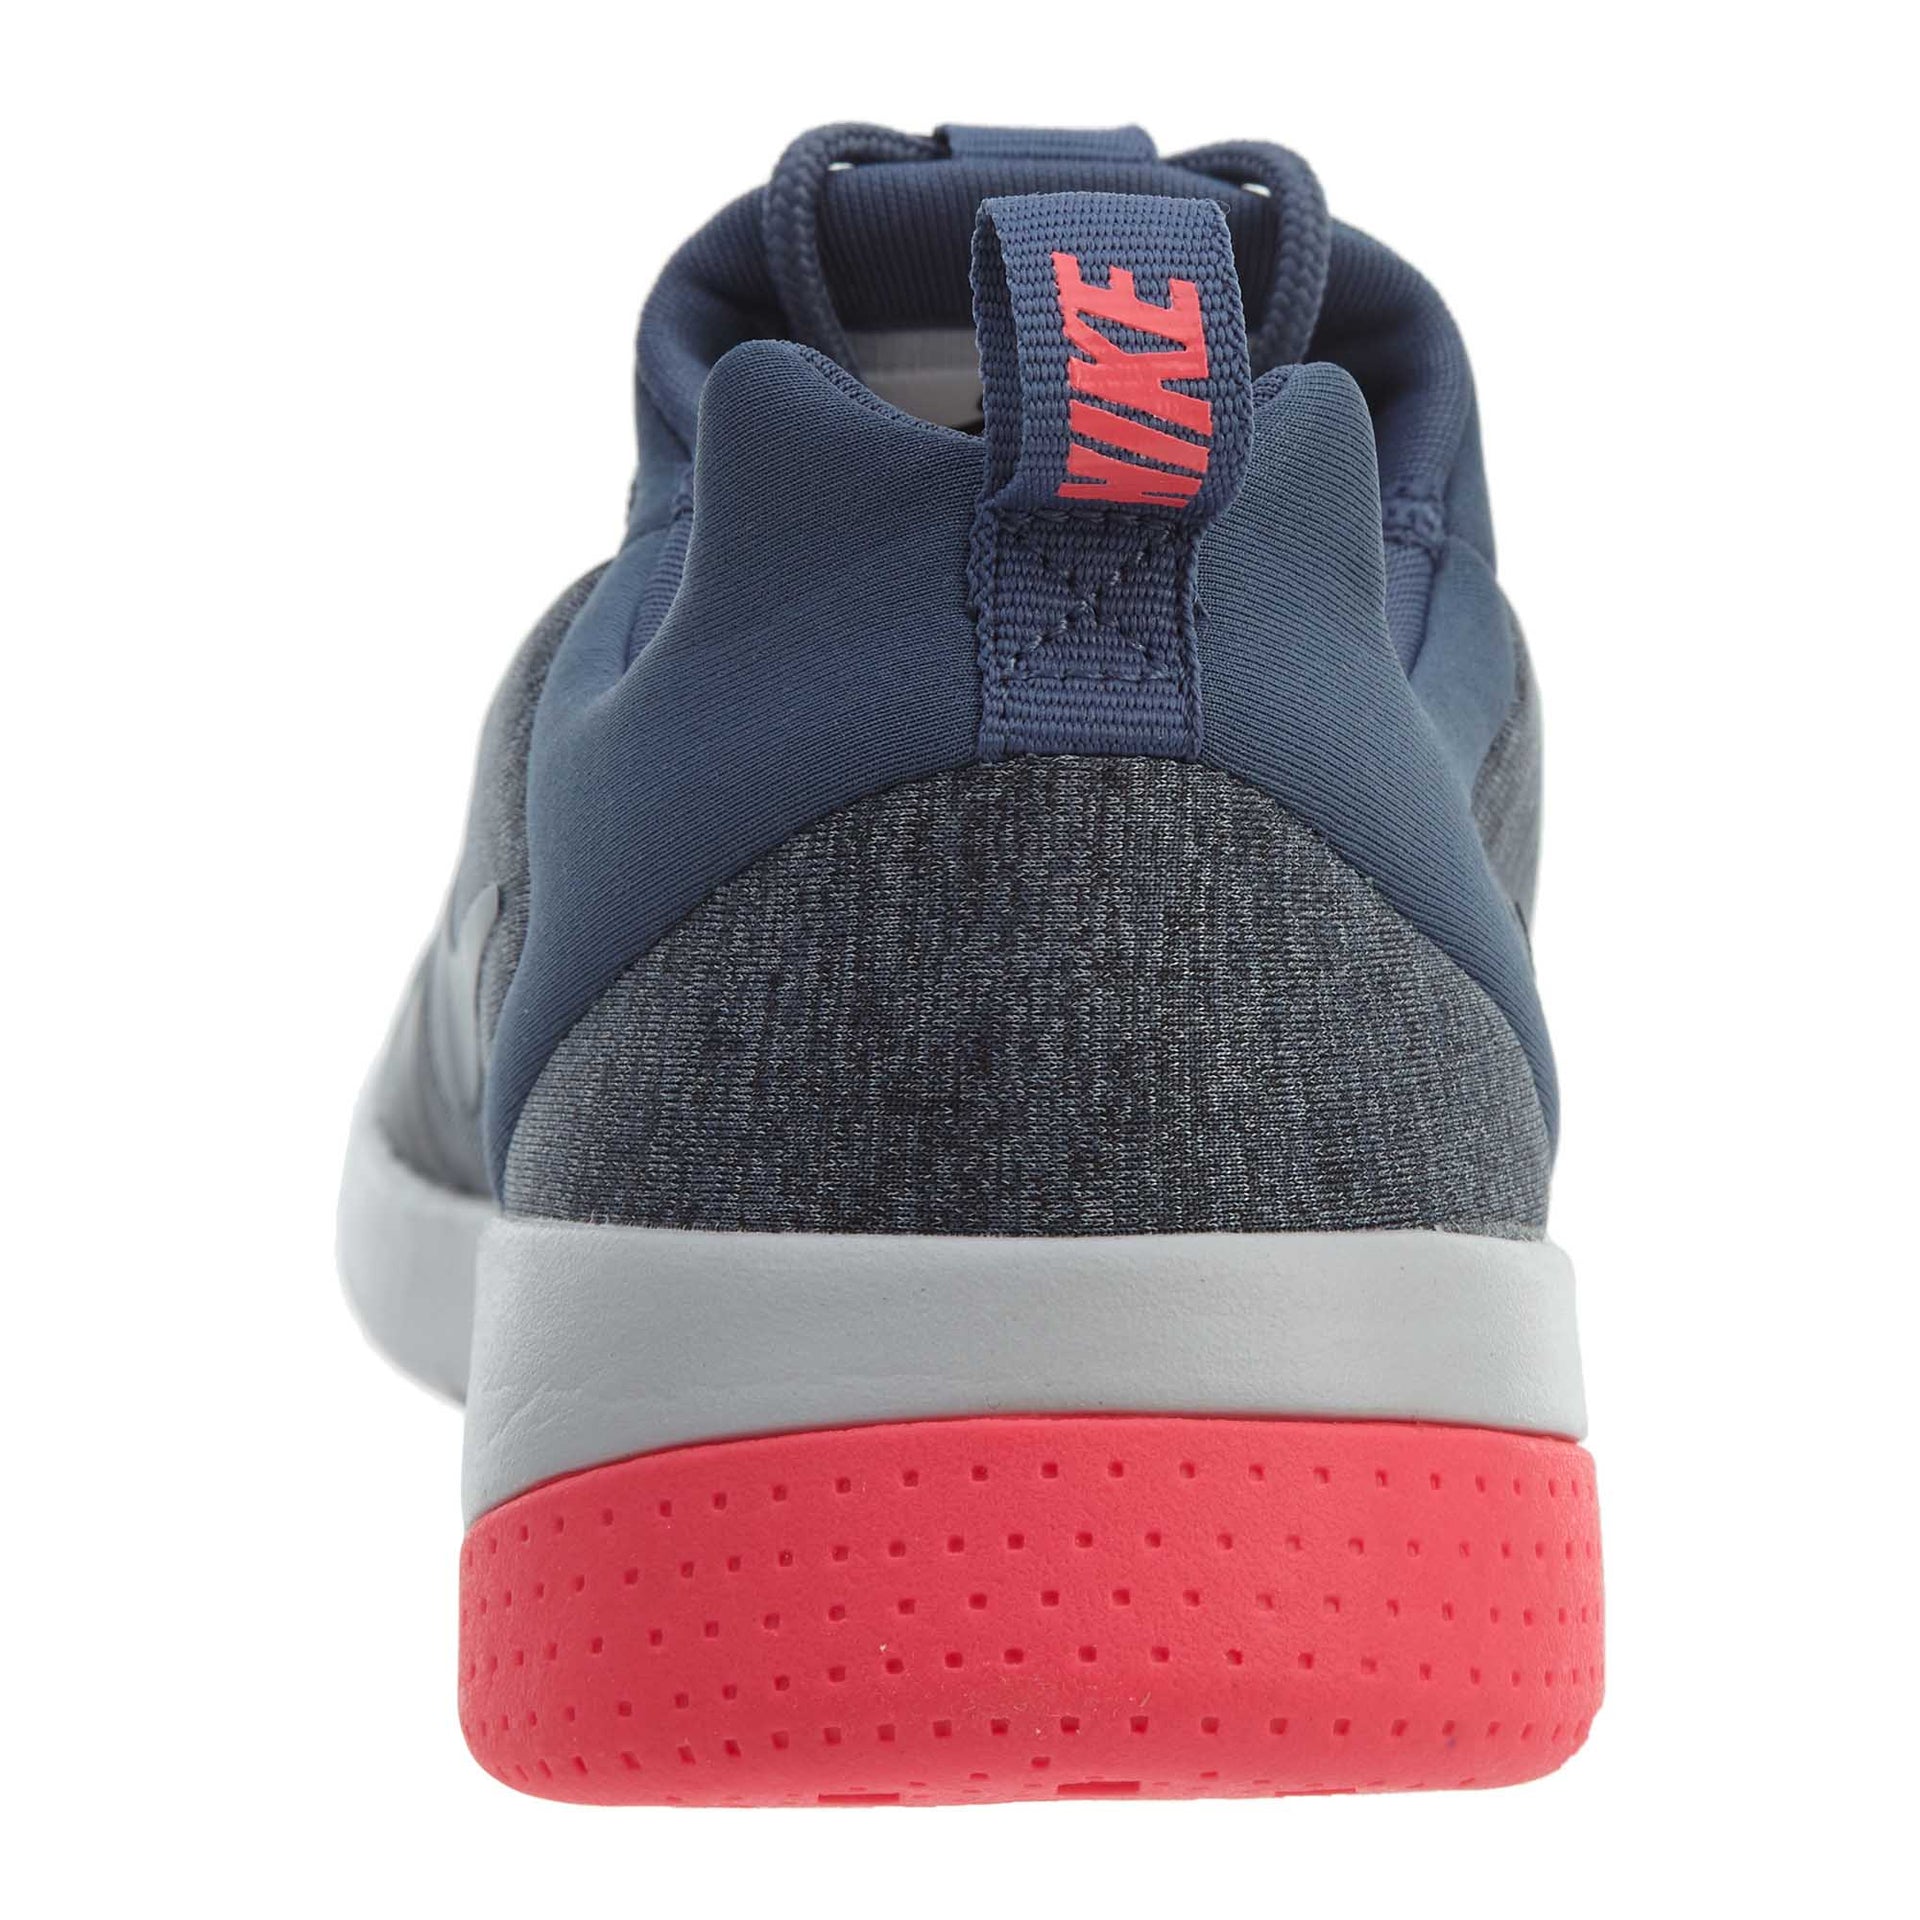 Nike Ck Racer Diffused Blue Diffused Blue (Women's)